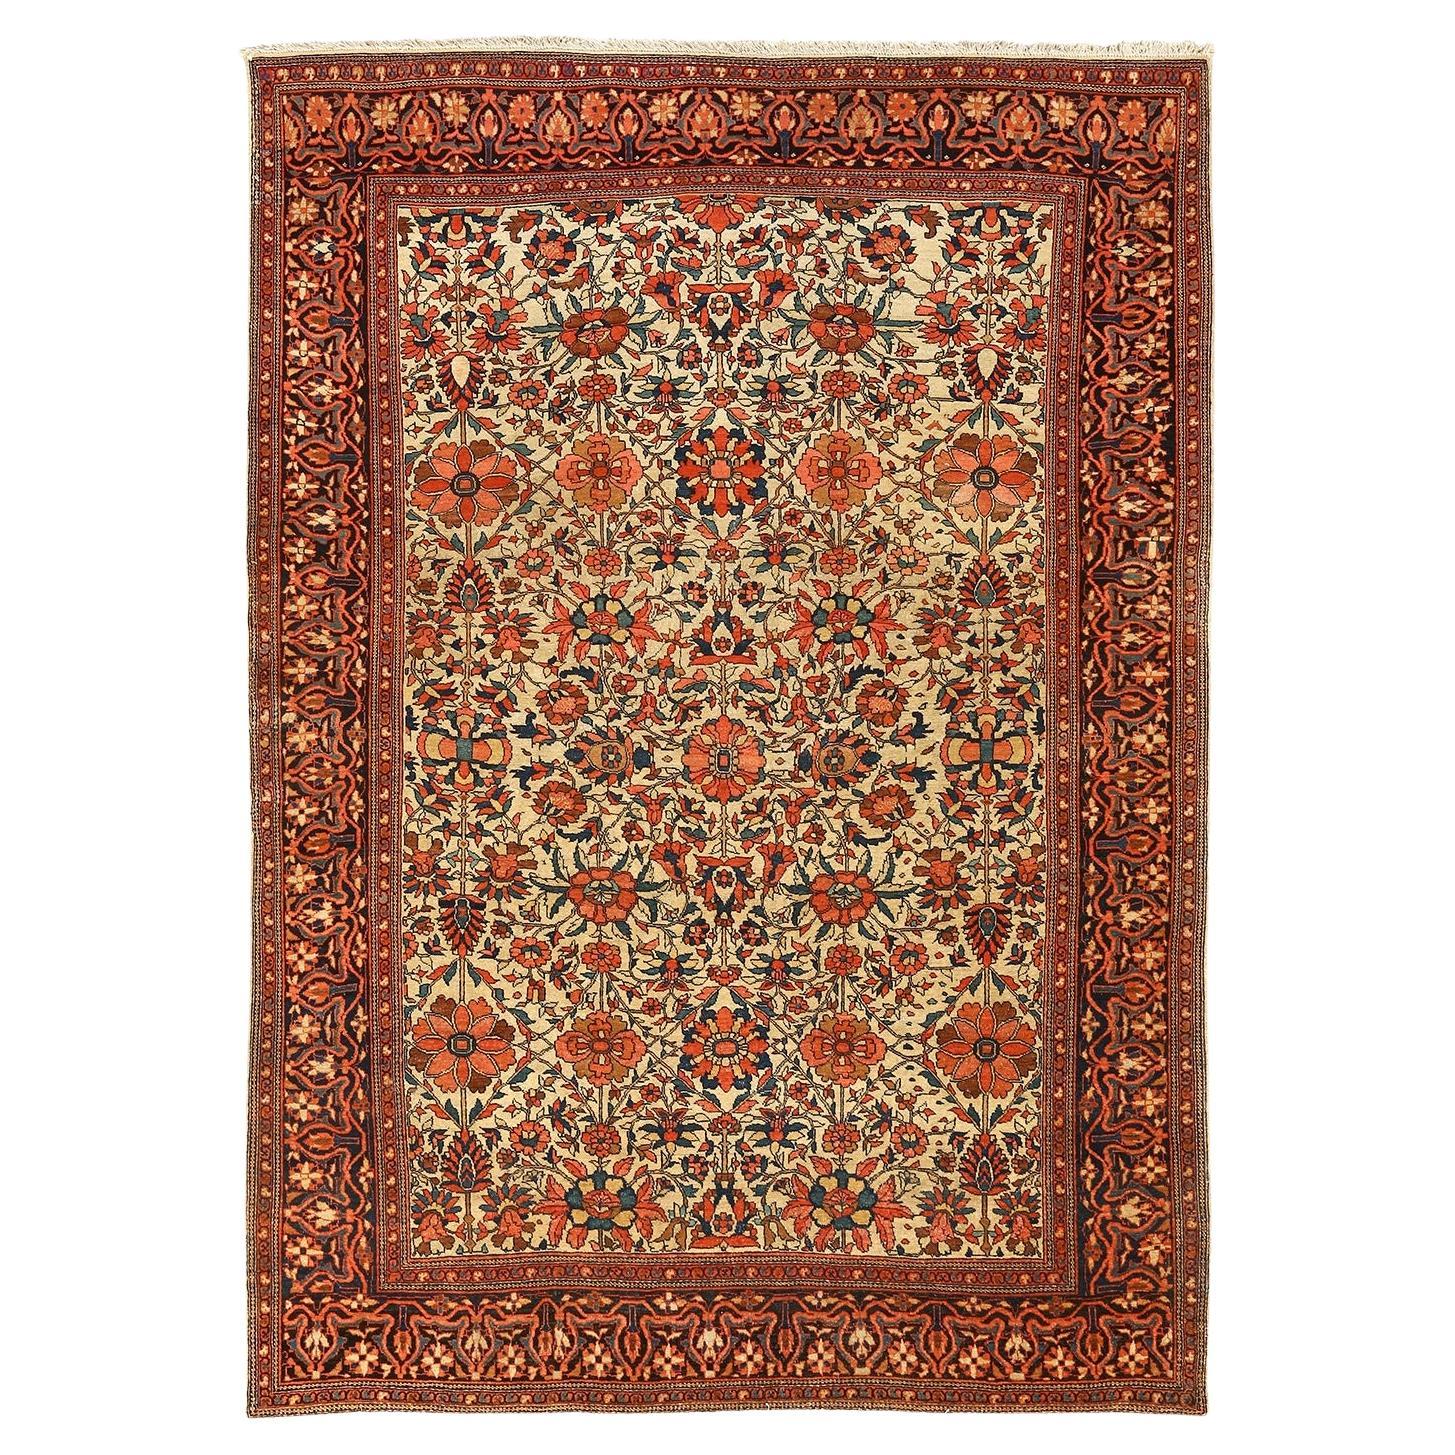 Damoka Collection Antique Persian Farahan - Size: 6 ft 5 in x 4 ft 6 in